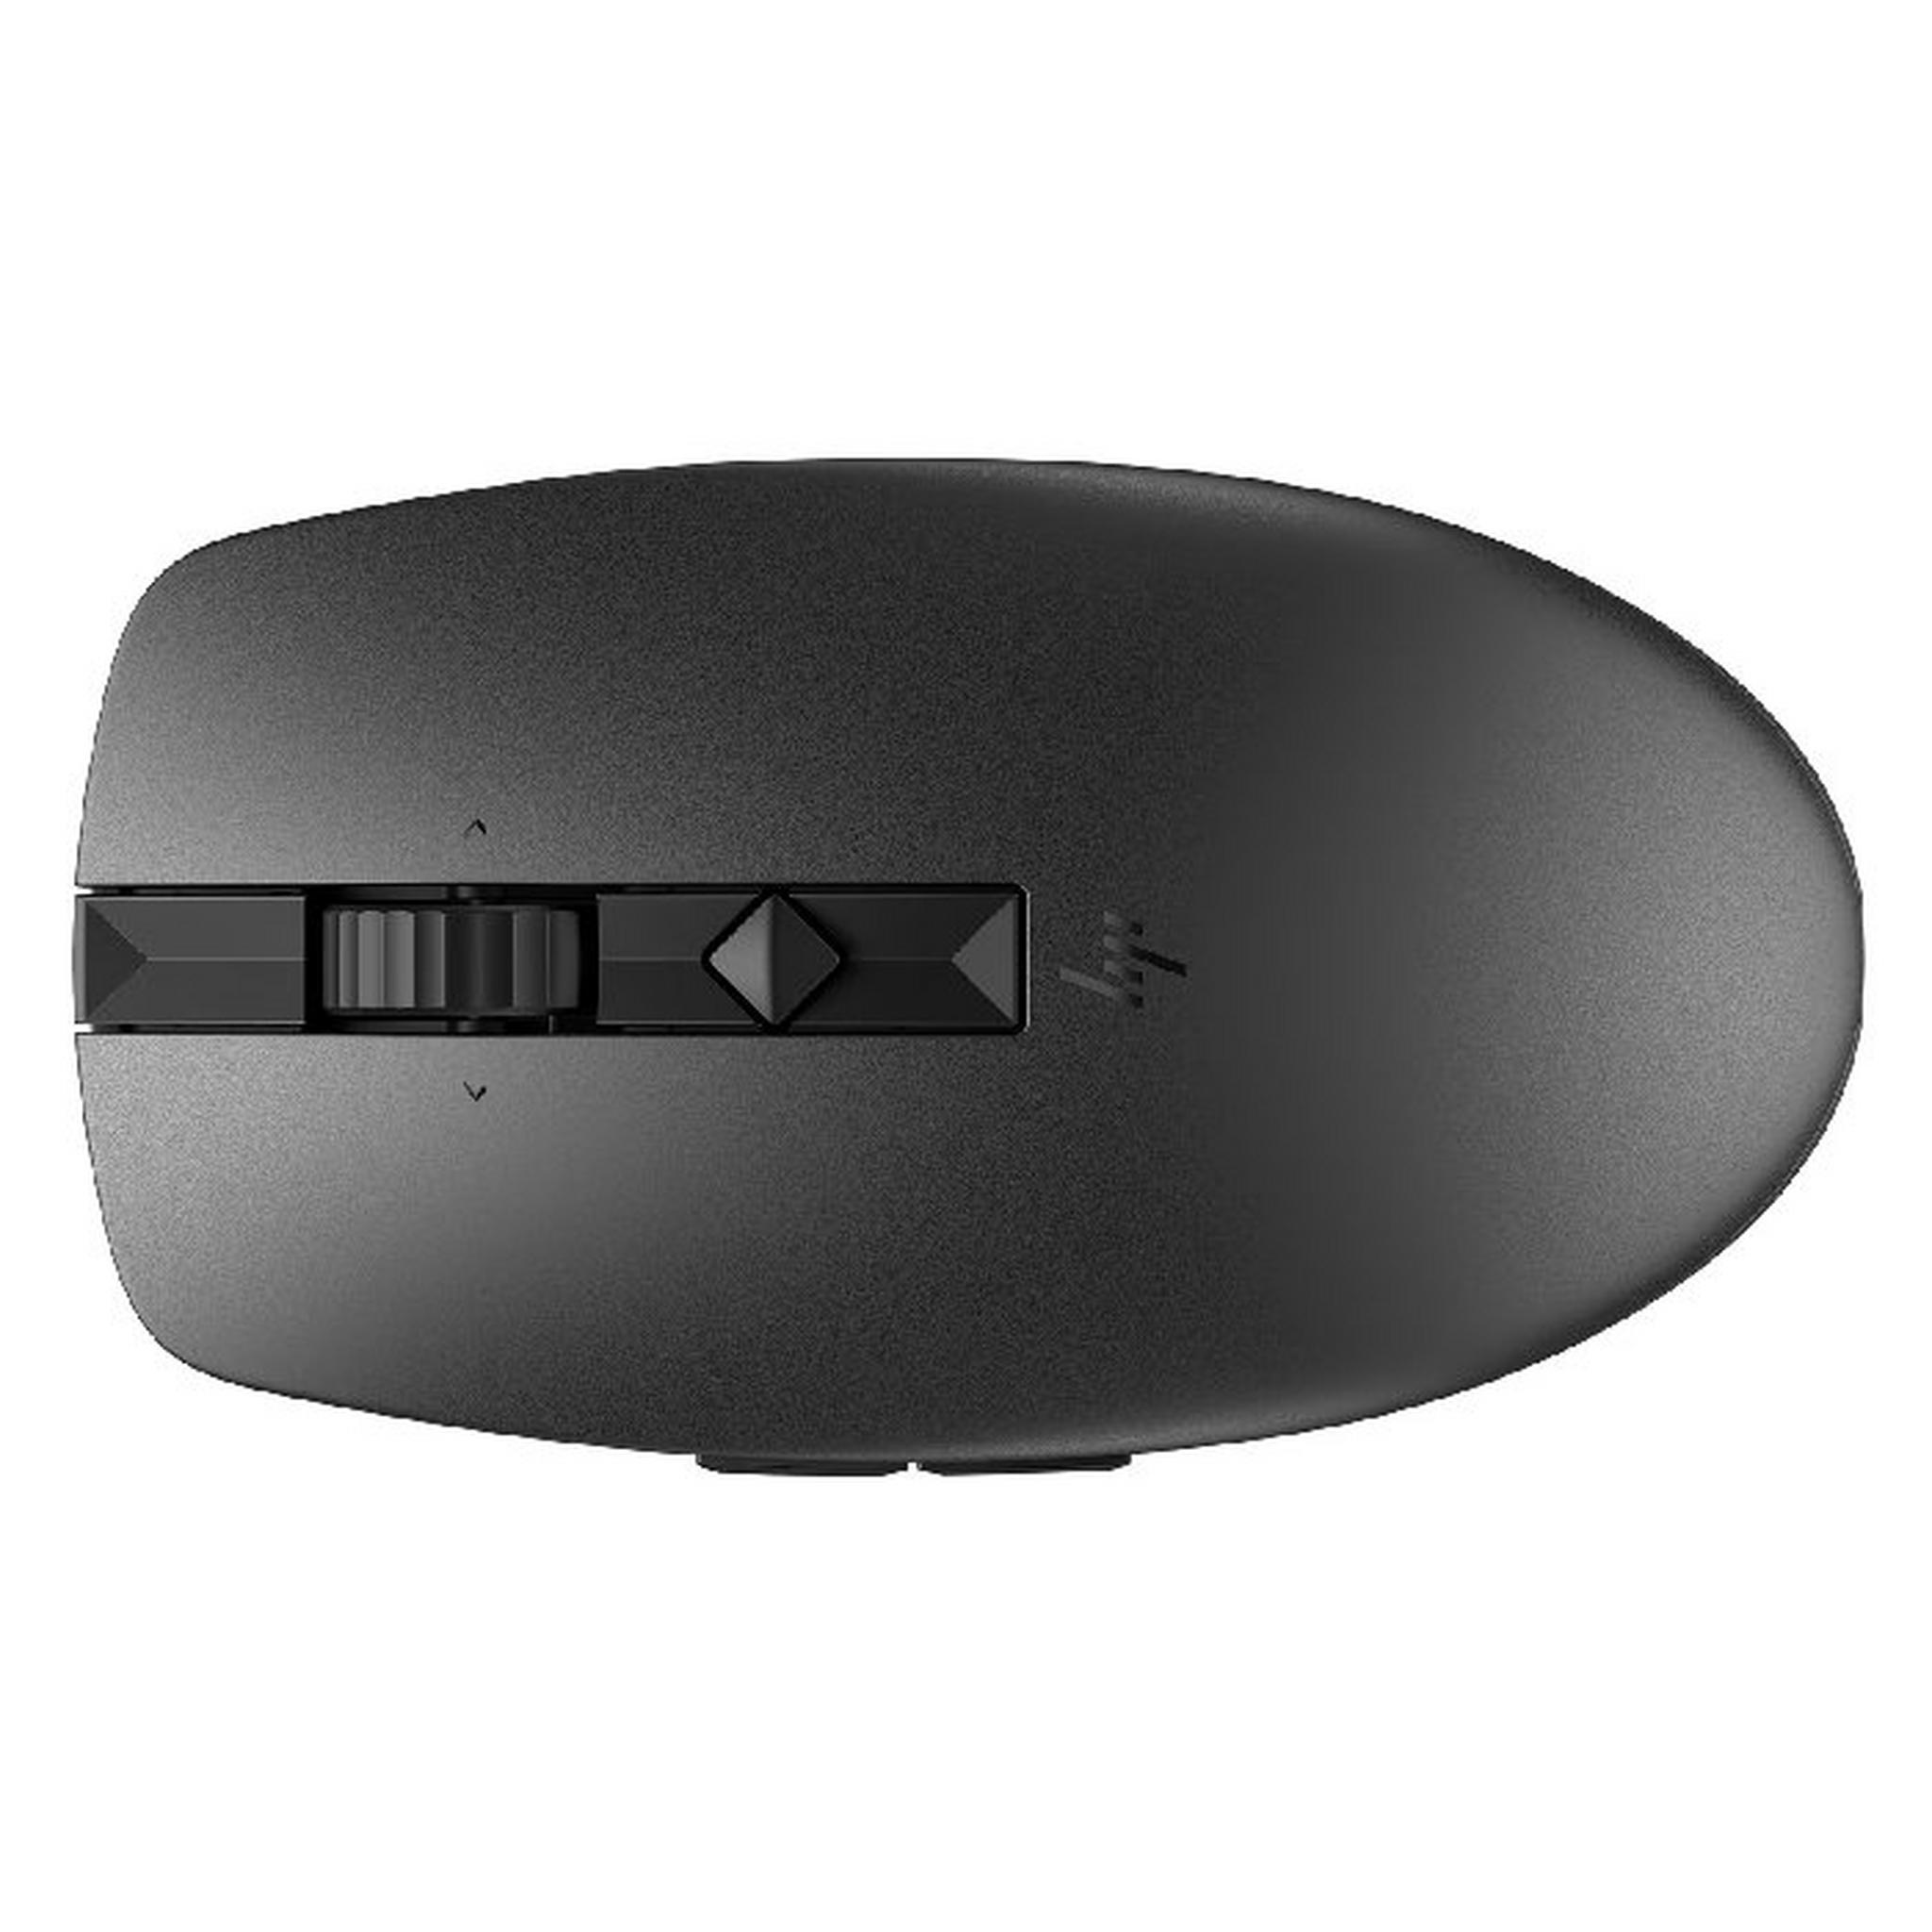 HP 710 Rechargeable Silent Wireless Mouse, 3000dpi - Graphite